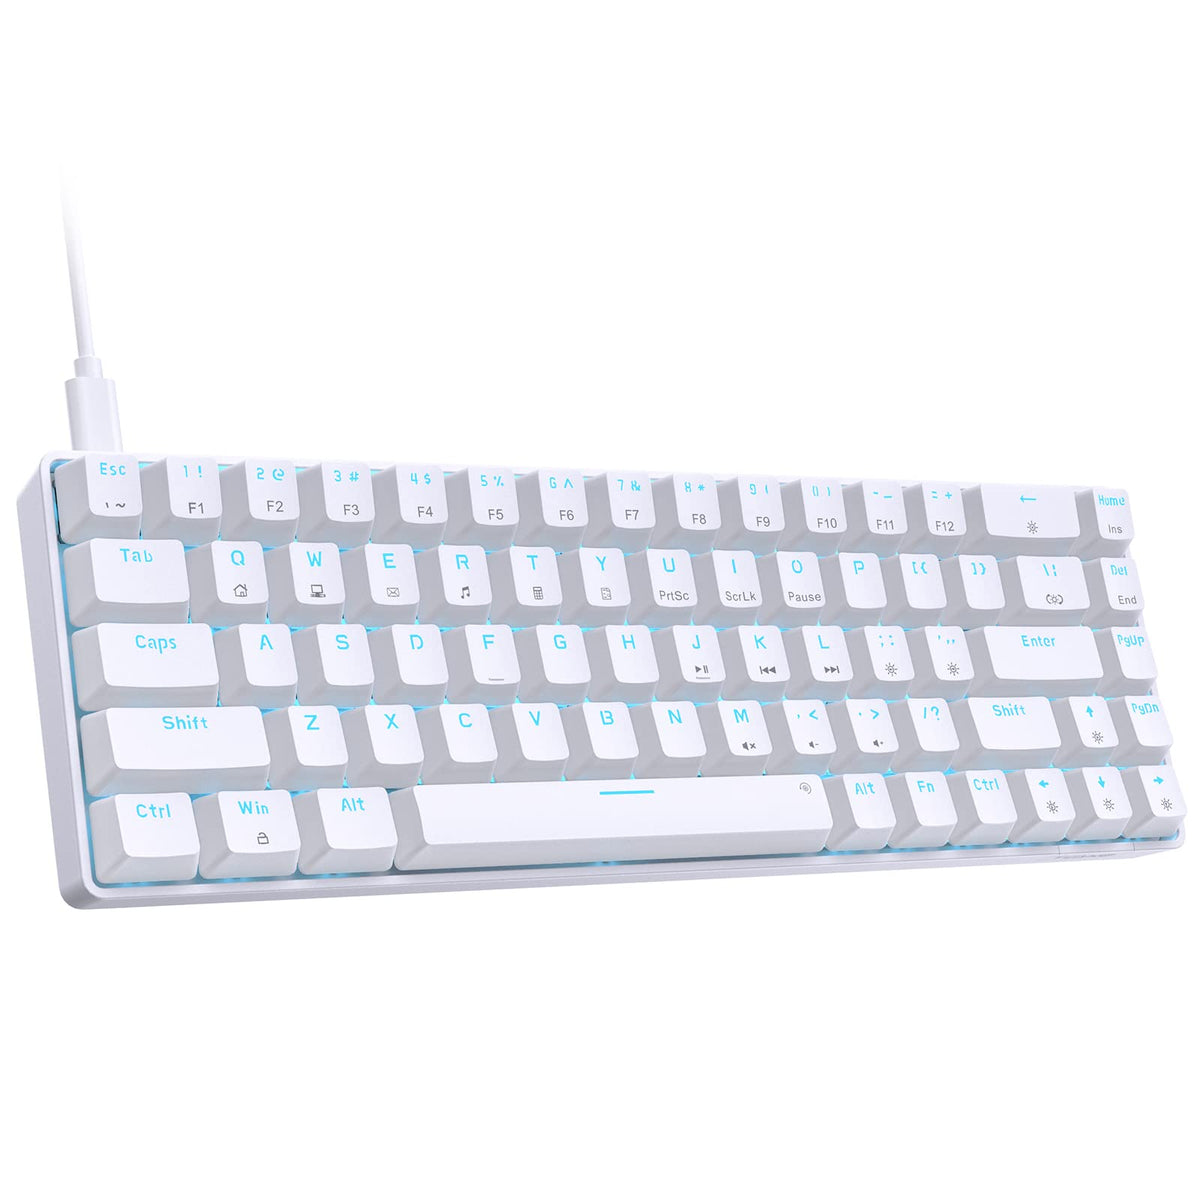 DIERYA T68SE 60% Gaming Mechanical Keyboard,Ultra Compact Mini 68 Key with Red Switches Wired Keyboard,Anti-Ghosting Keys, for Windows Laptops and PC Gamers,White